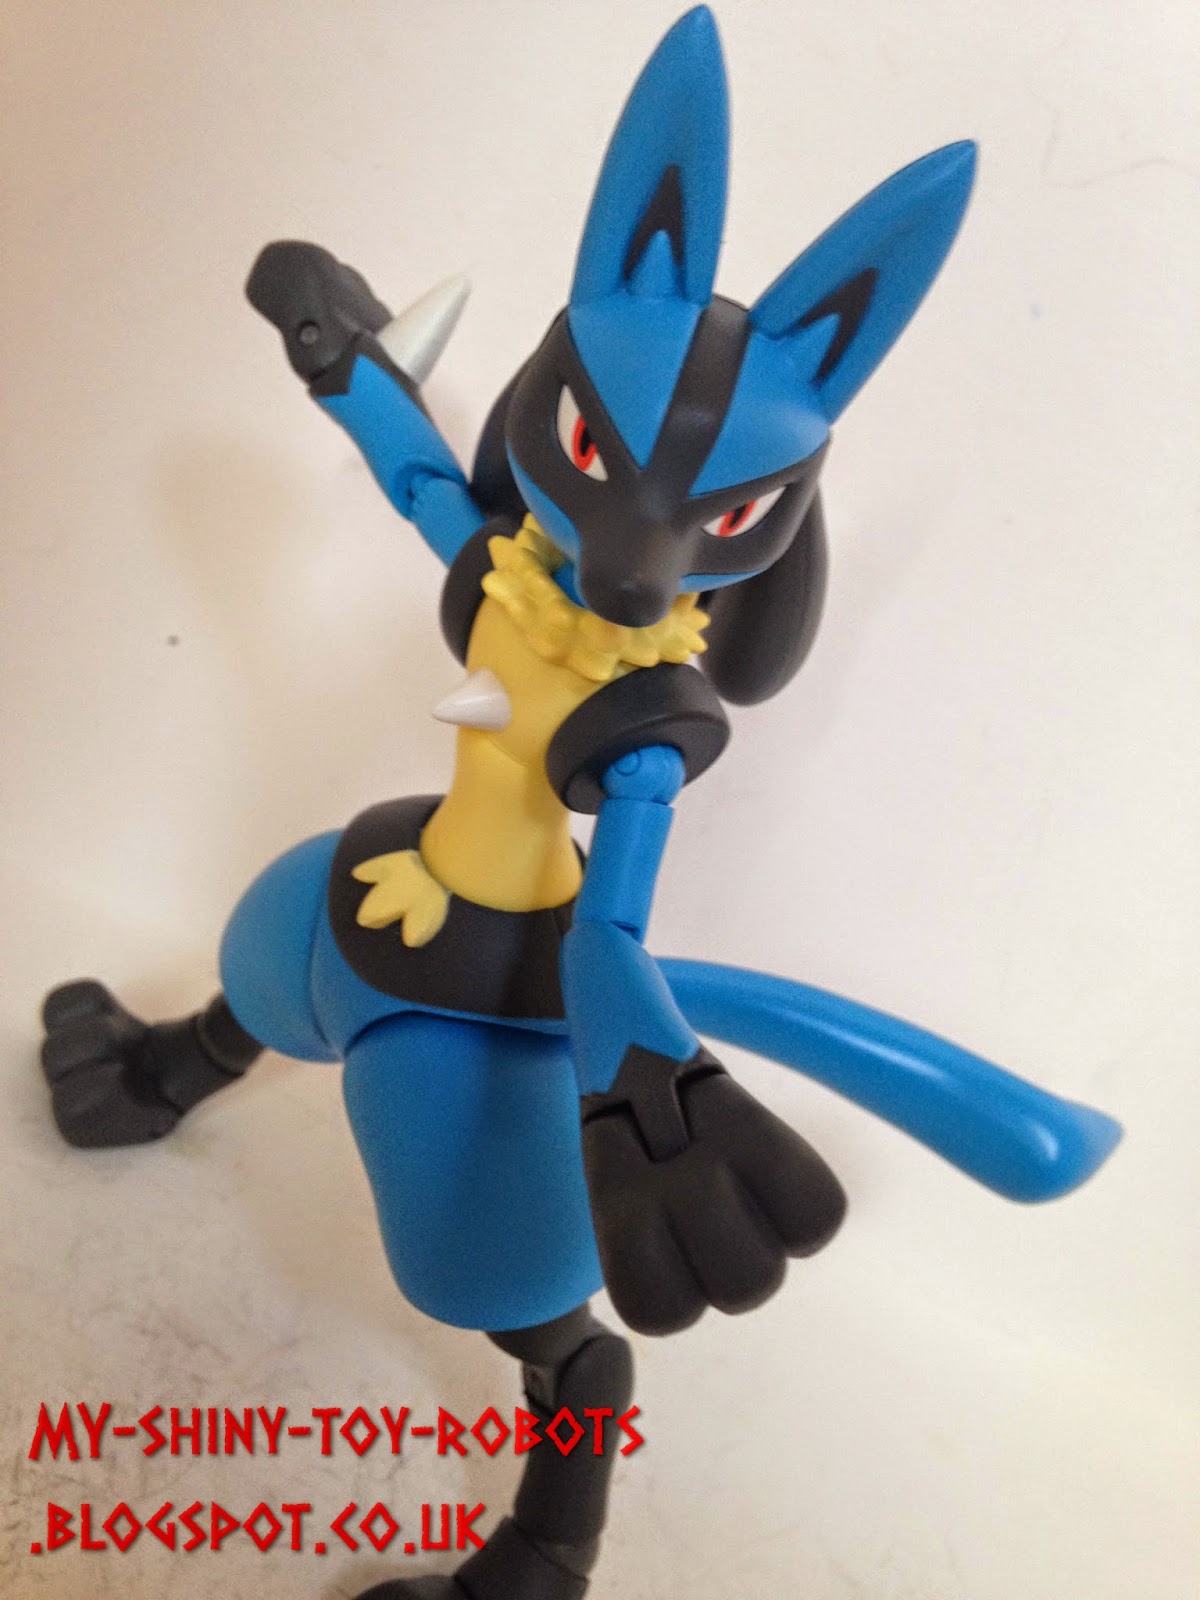 Lucario used metal claw